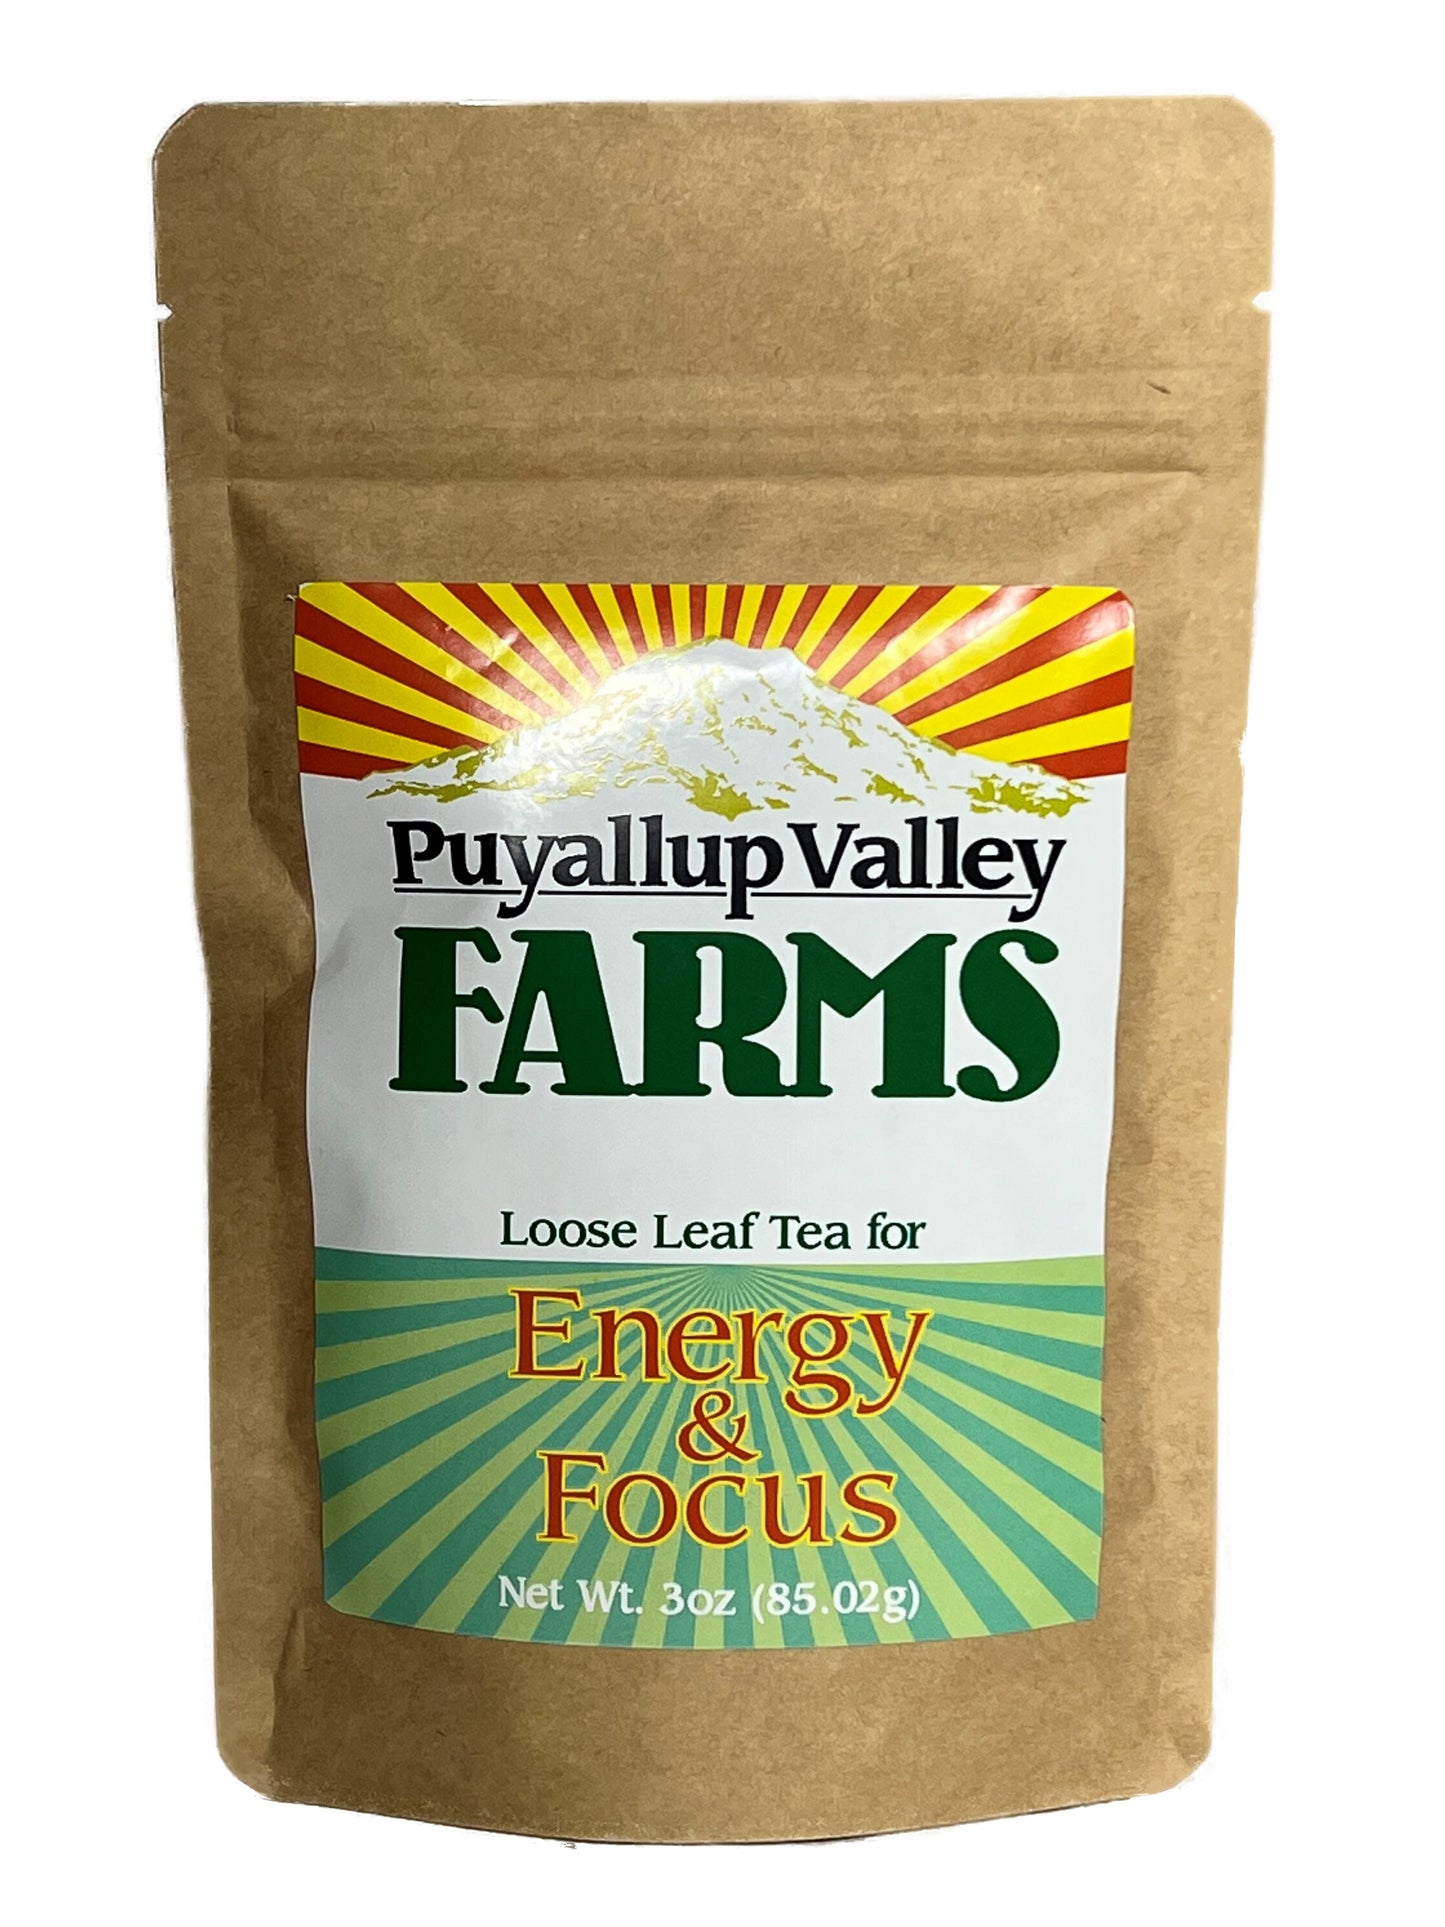 Premium Energy and Focus Loose Leaf Tea by Puyallup Valley Farms | 180 mg Caffeine for Energy | White Kratom for Focus | Plus Much More | FREE SHIPPING | Energy and Focus Loose Leaf Tea 3 Oz.